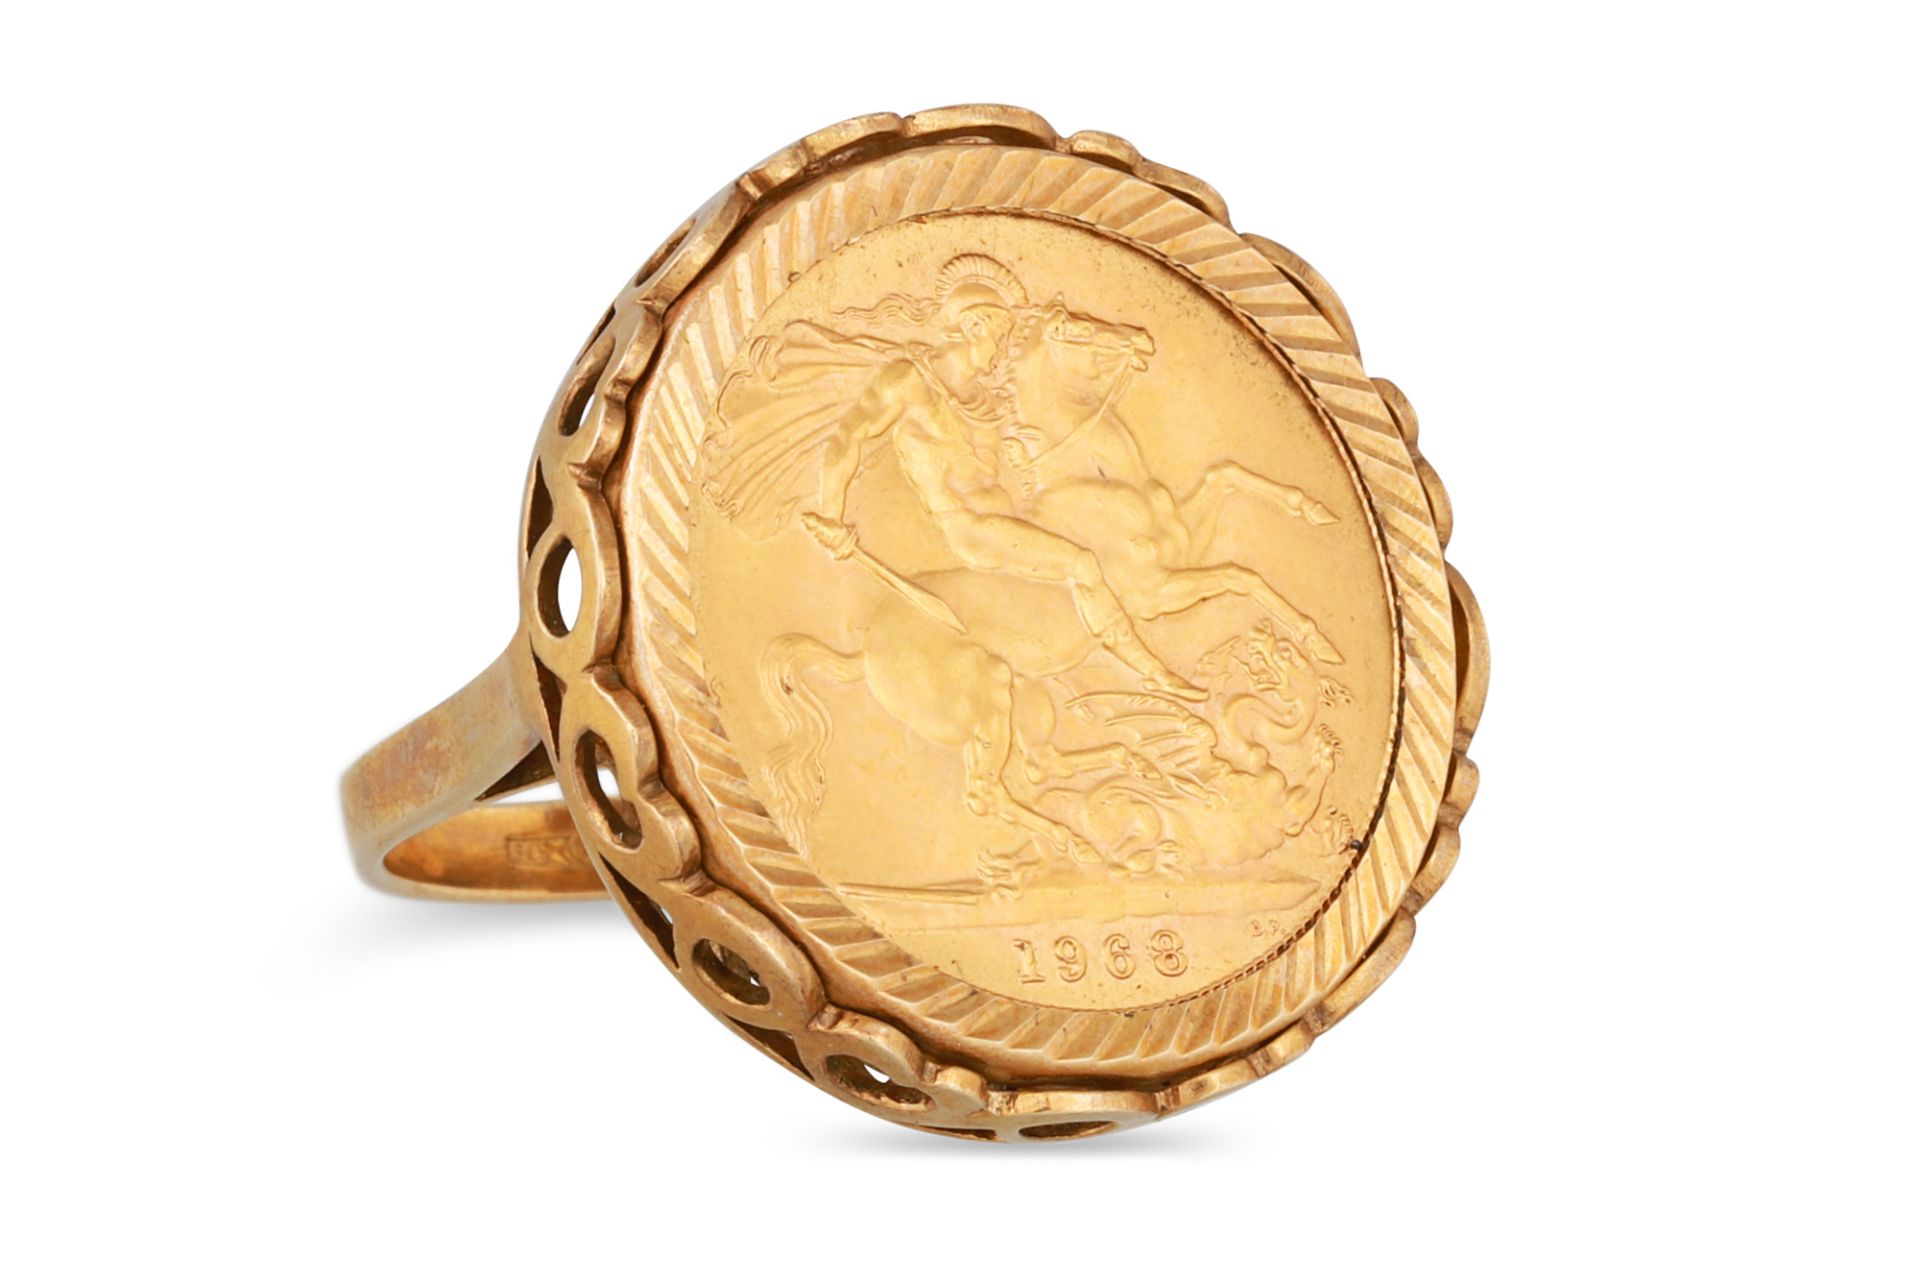 A QUEEN ELIZABETH II FULL SOVEREIGN 1968, mounted in a 9ct gold ring, 13.1 g. Size: N - O